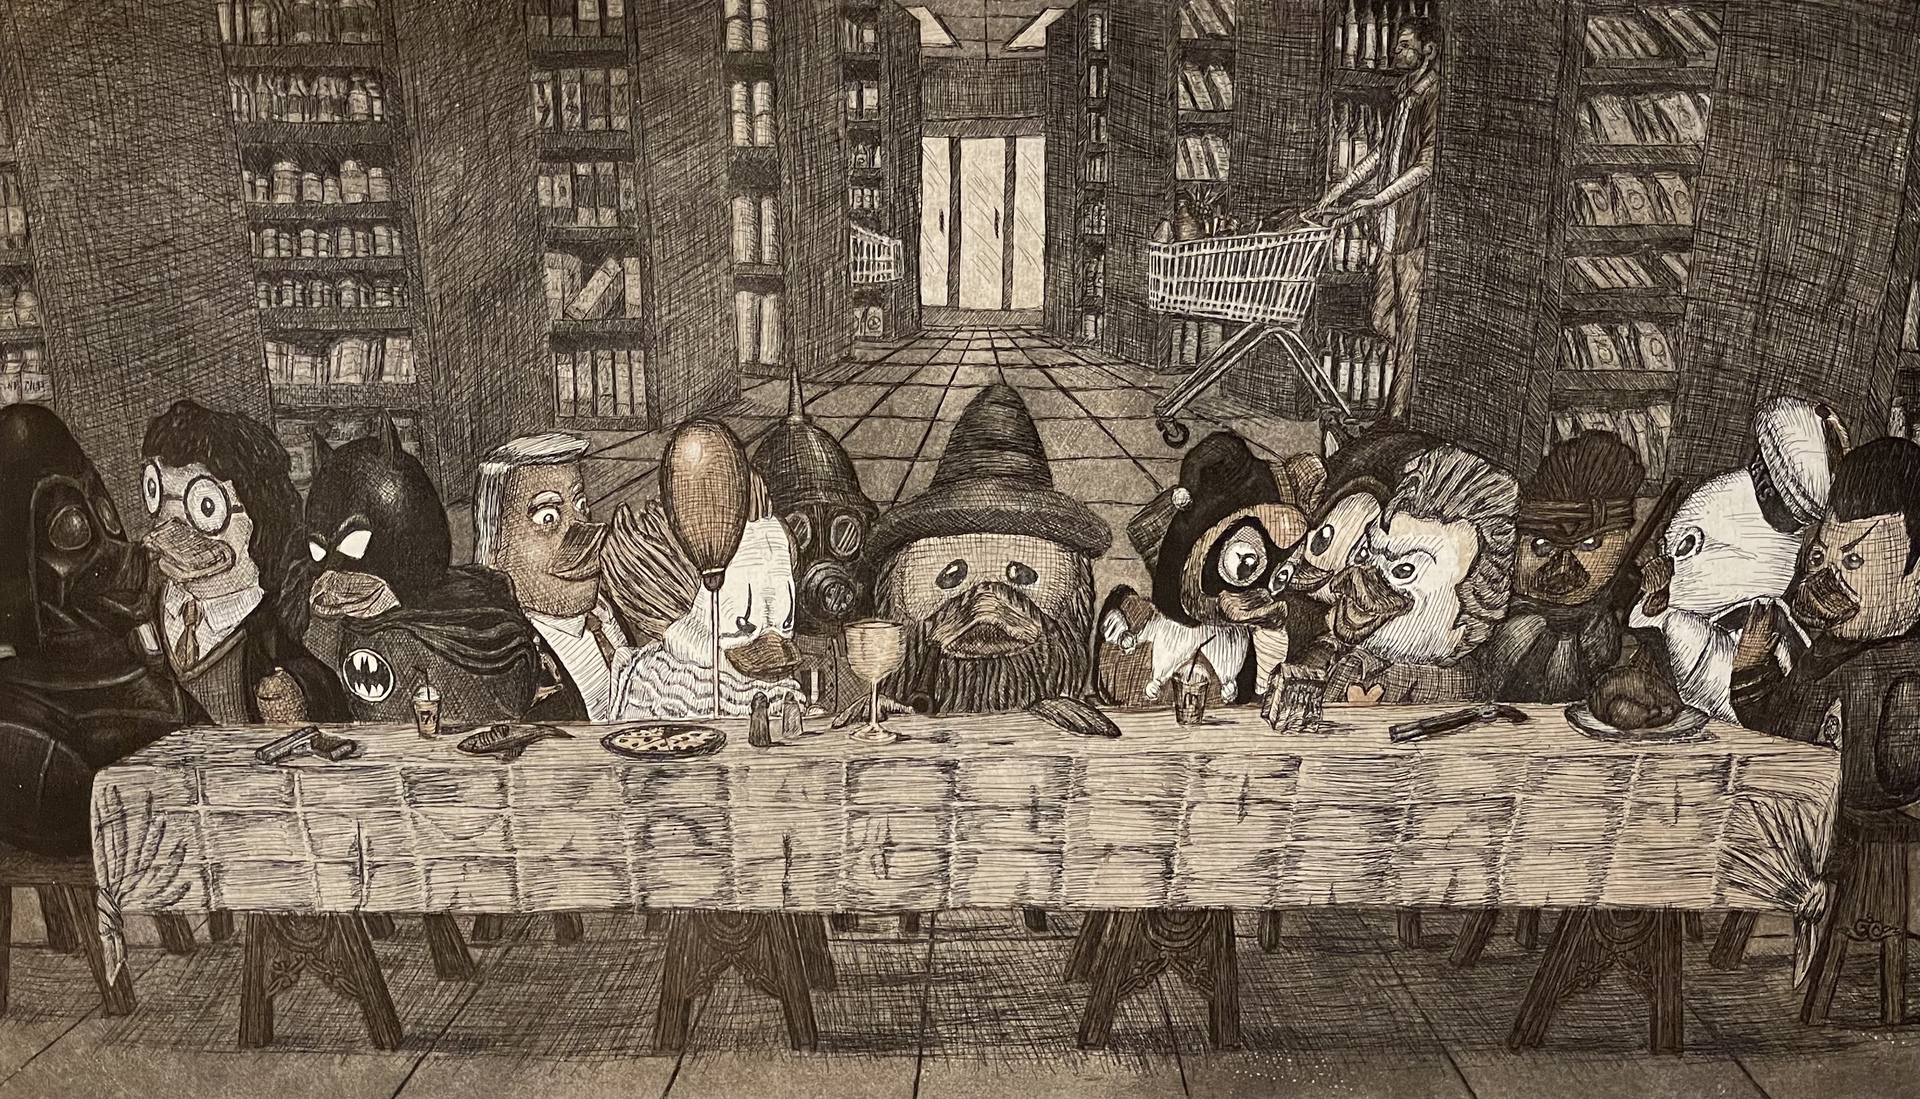 Alex Lawson etching of a Last Supper motif with cartoon-like duck figures within a super market environment. The piece is a satirical statement of current popular consumerism trends.